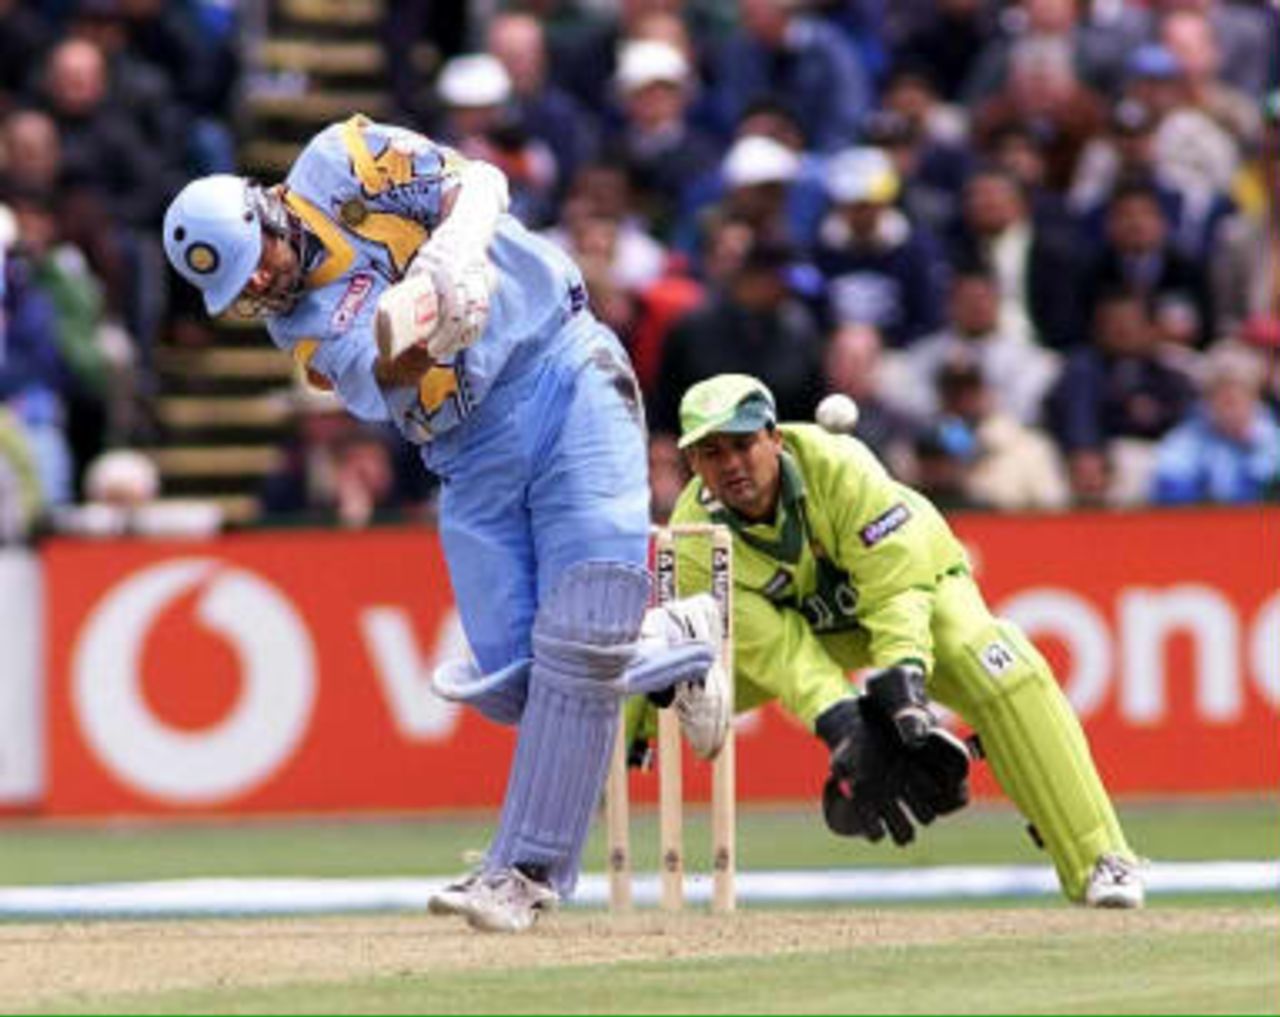 Indian batsman Rahul Dravid flicks the ball from Saqlain to leg as Pakistan keeper Moin Khan looks on during their Cricket World Cup match at Old Trafford in Manchester 08 June 1999.